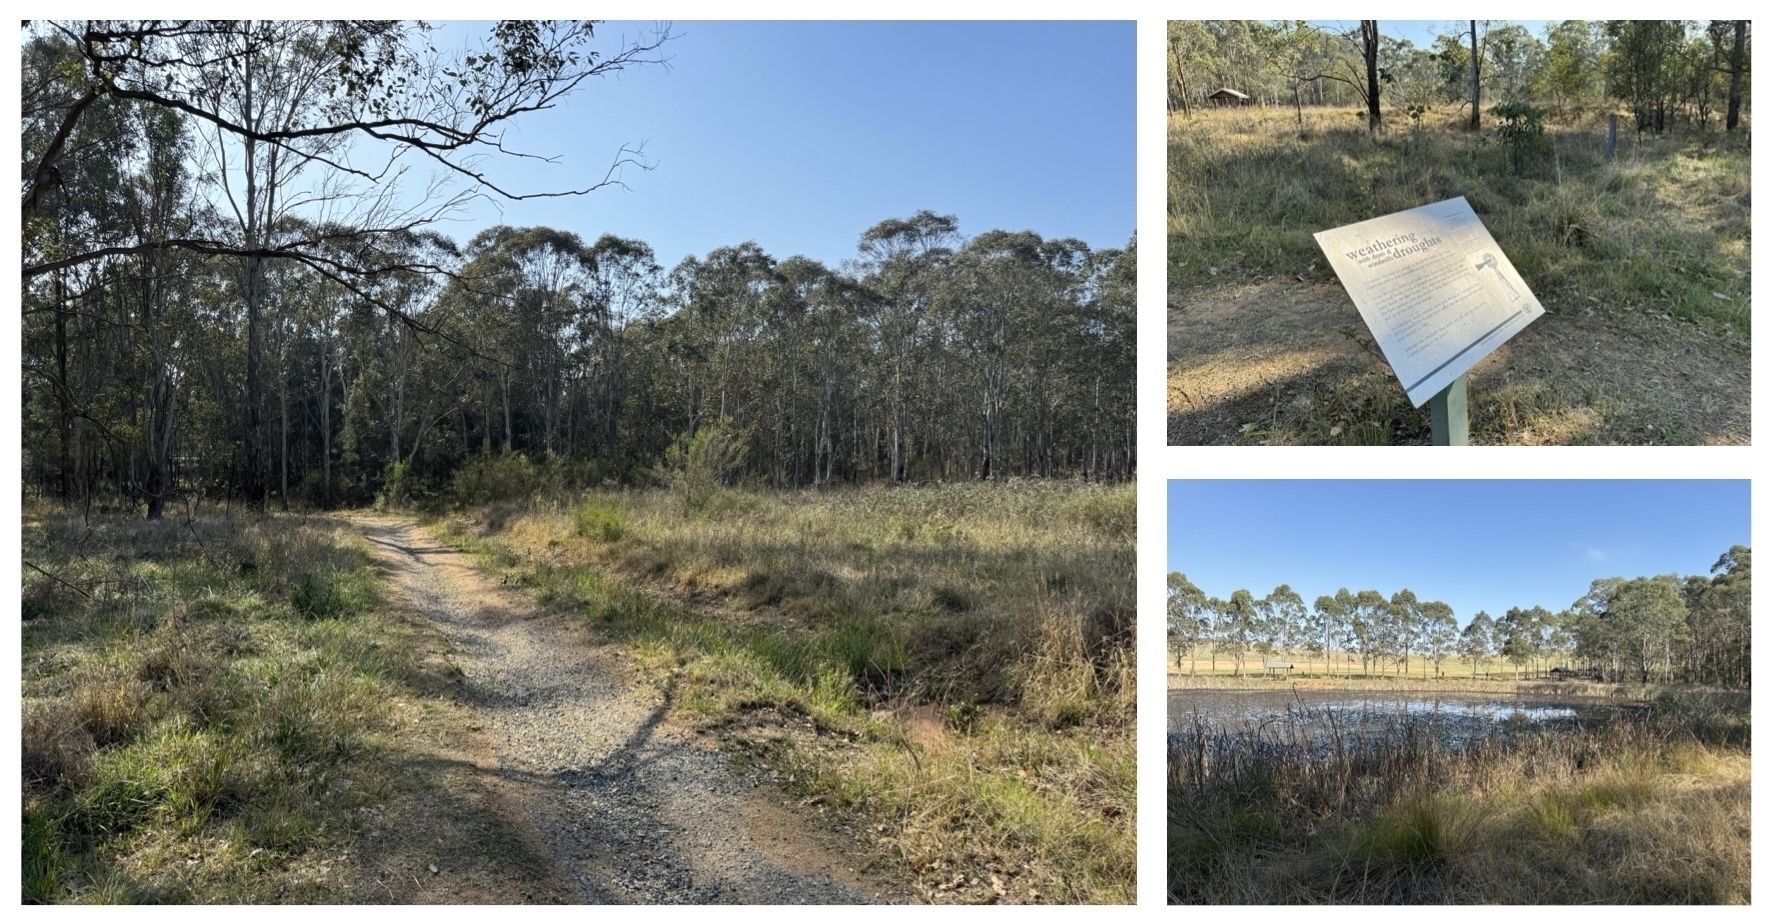 Collage of 3 photos of the tracks, pond and picnic shelters in our local national park